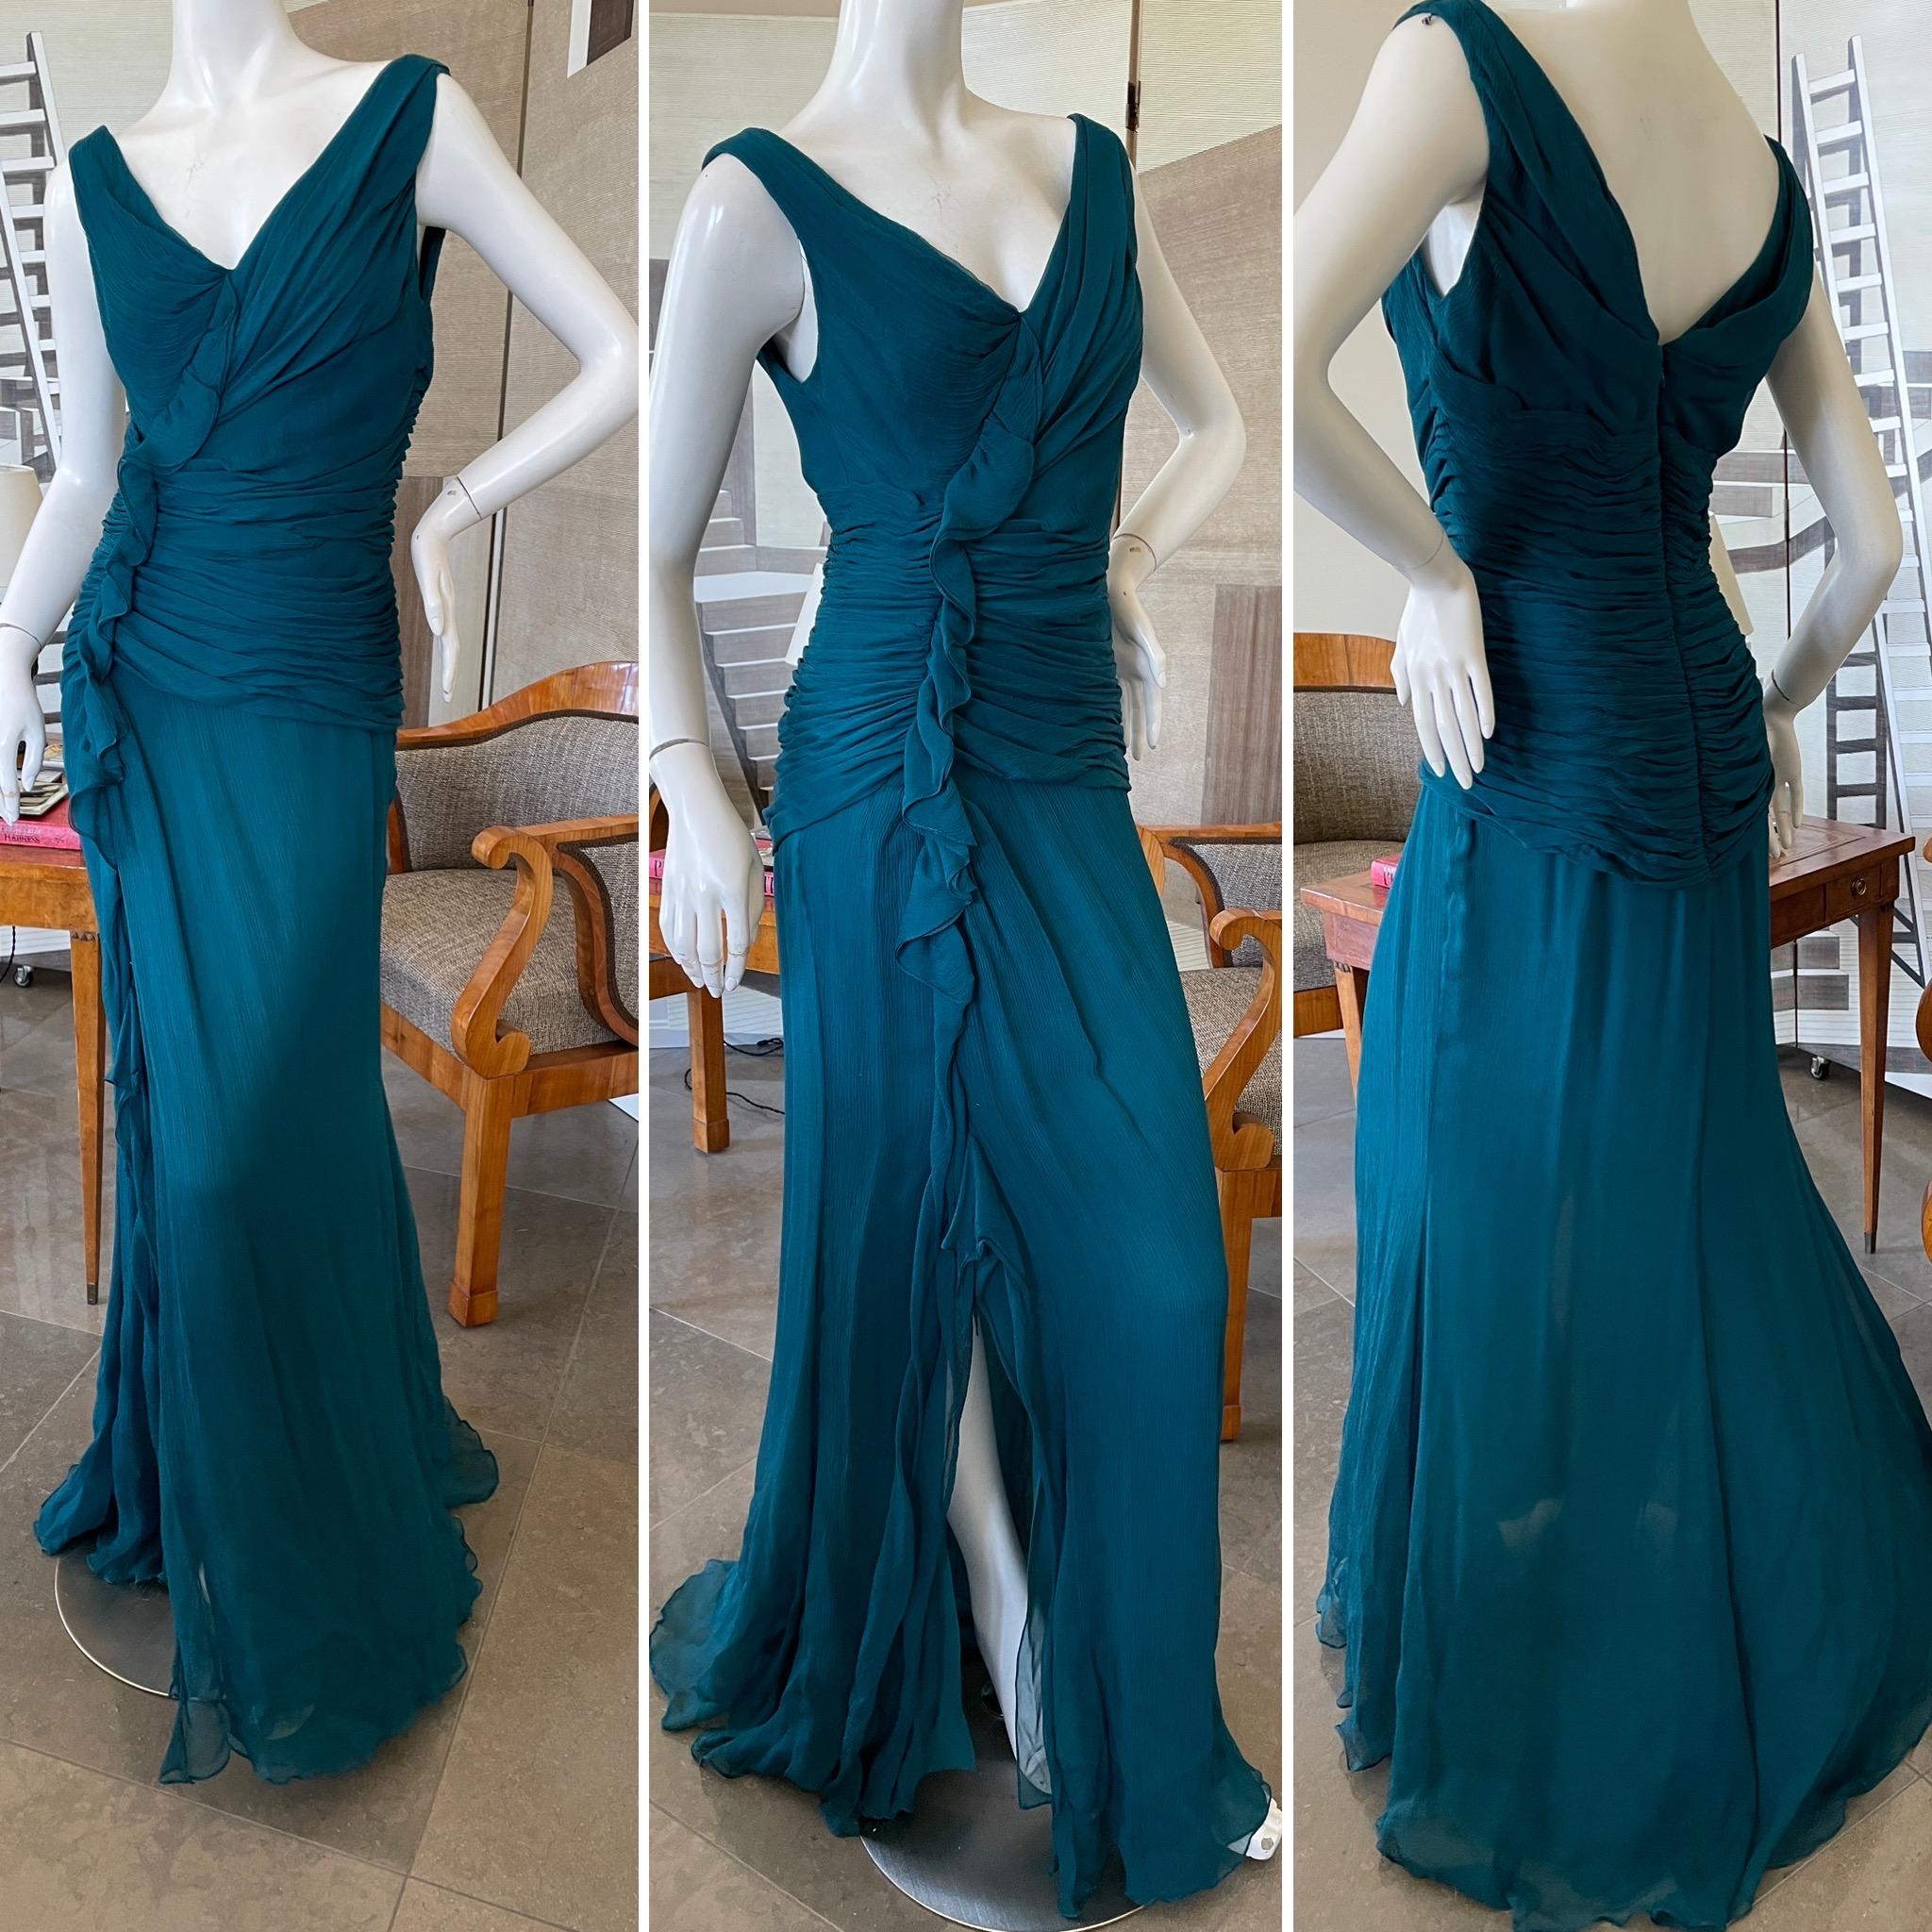 Oscar de la Renta Elegant Teal Blue Silk Shirred Evening Dress
  Stunning. Please use the zoom feature to see all the details.
 Size 8
Bust 38